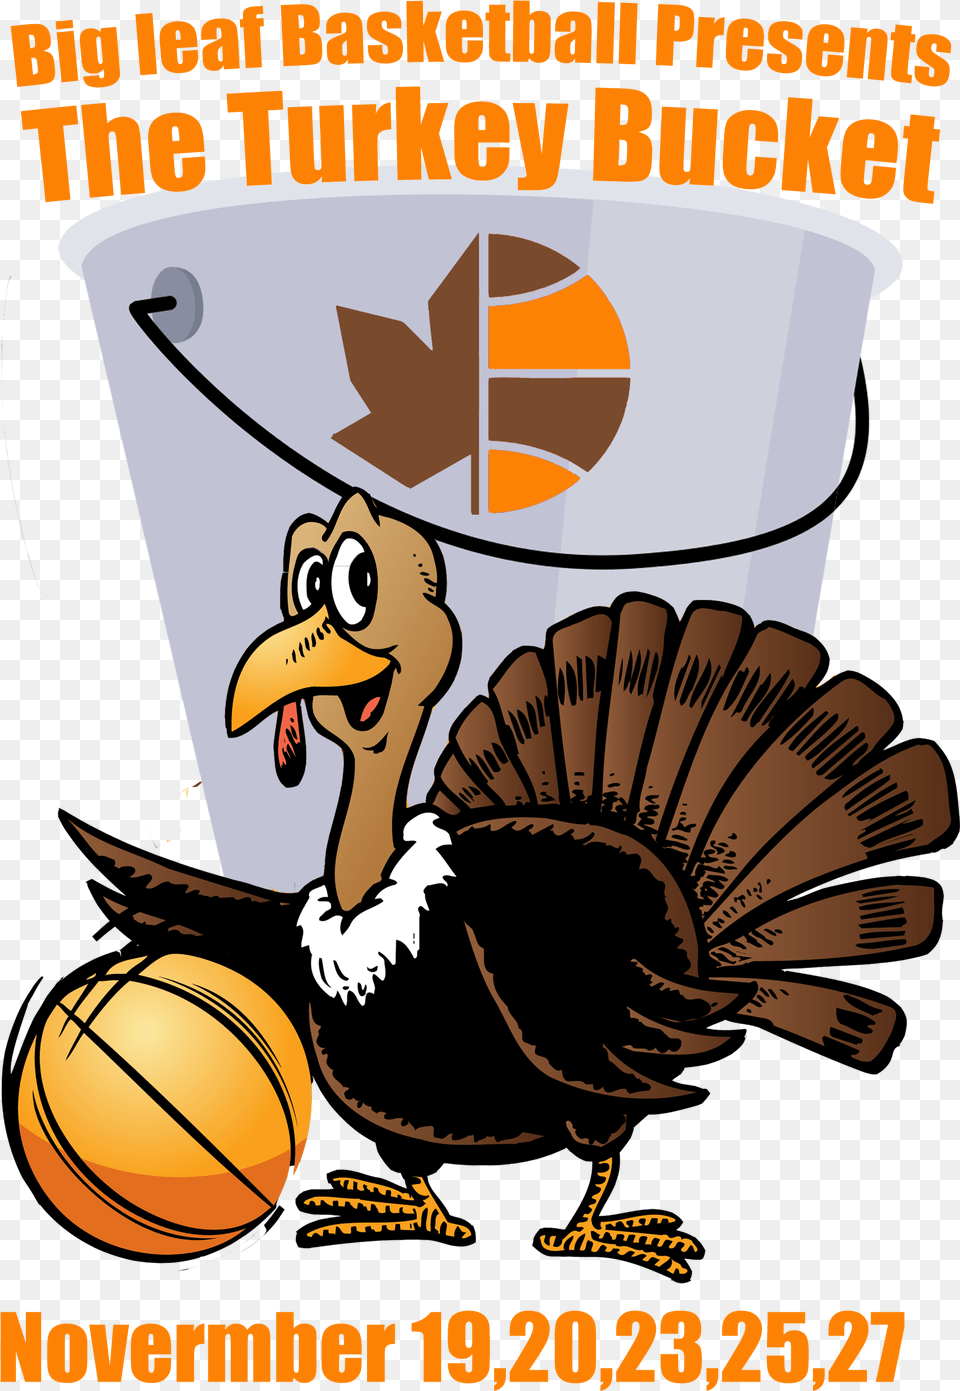 Large Basketball Clipart Ugly Dog Became Pretty Boy Tom Tom The Turkey Book, Ball, Basketball (ball), Sport Png